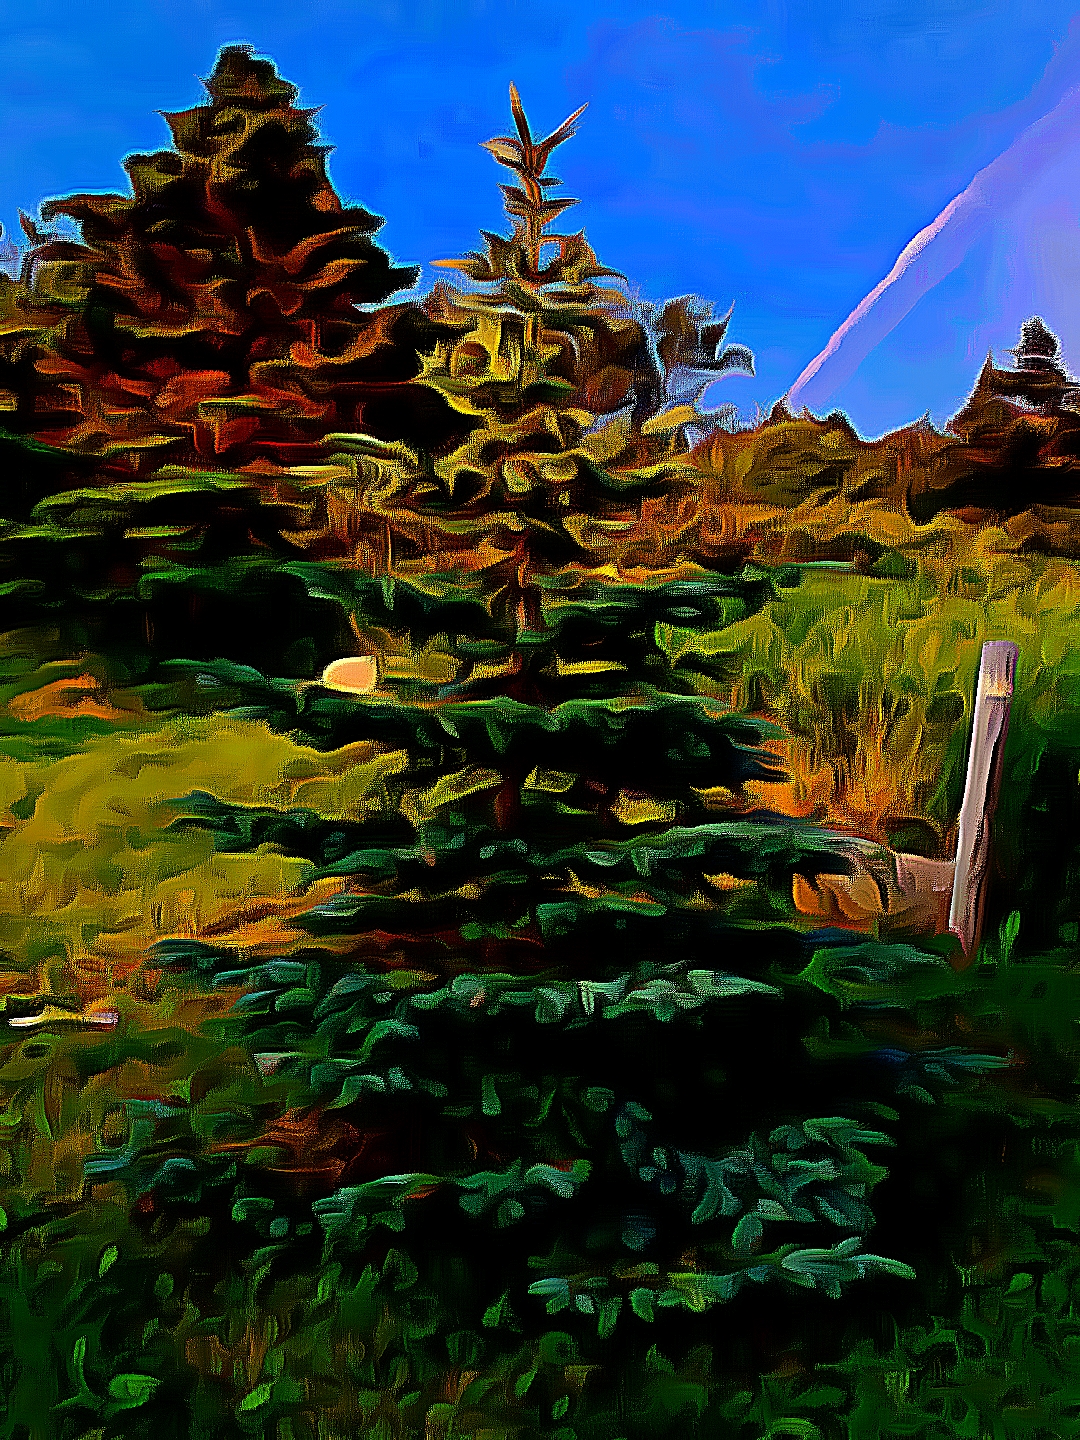 Cartoon image of a tree and forest during a sunny day